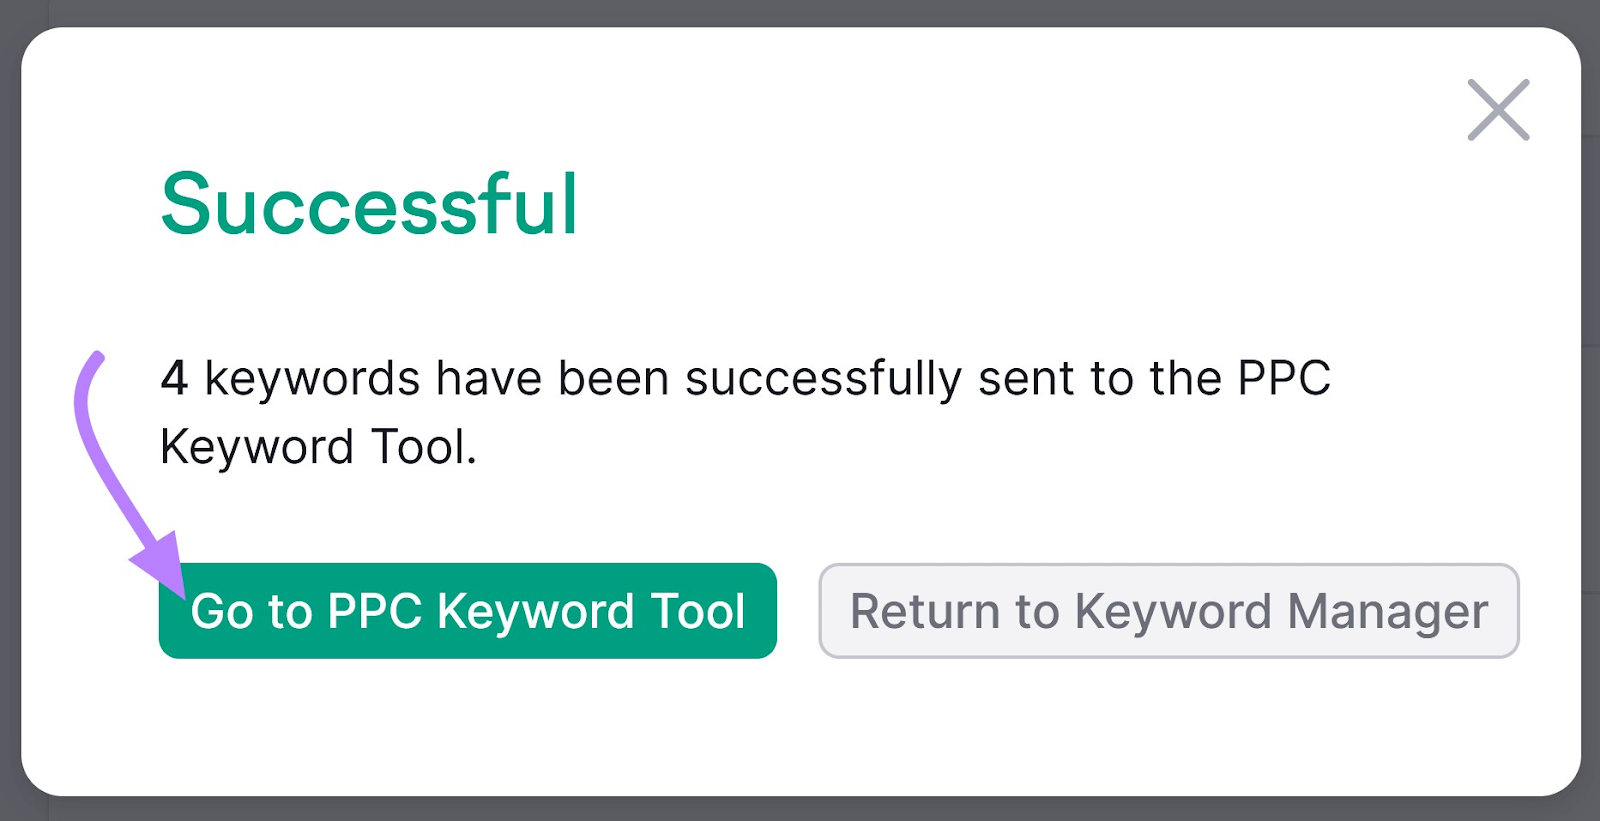 “Successful" message with “Go to PPC Keyword Tool” button highlighted